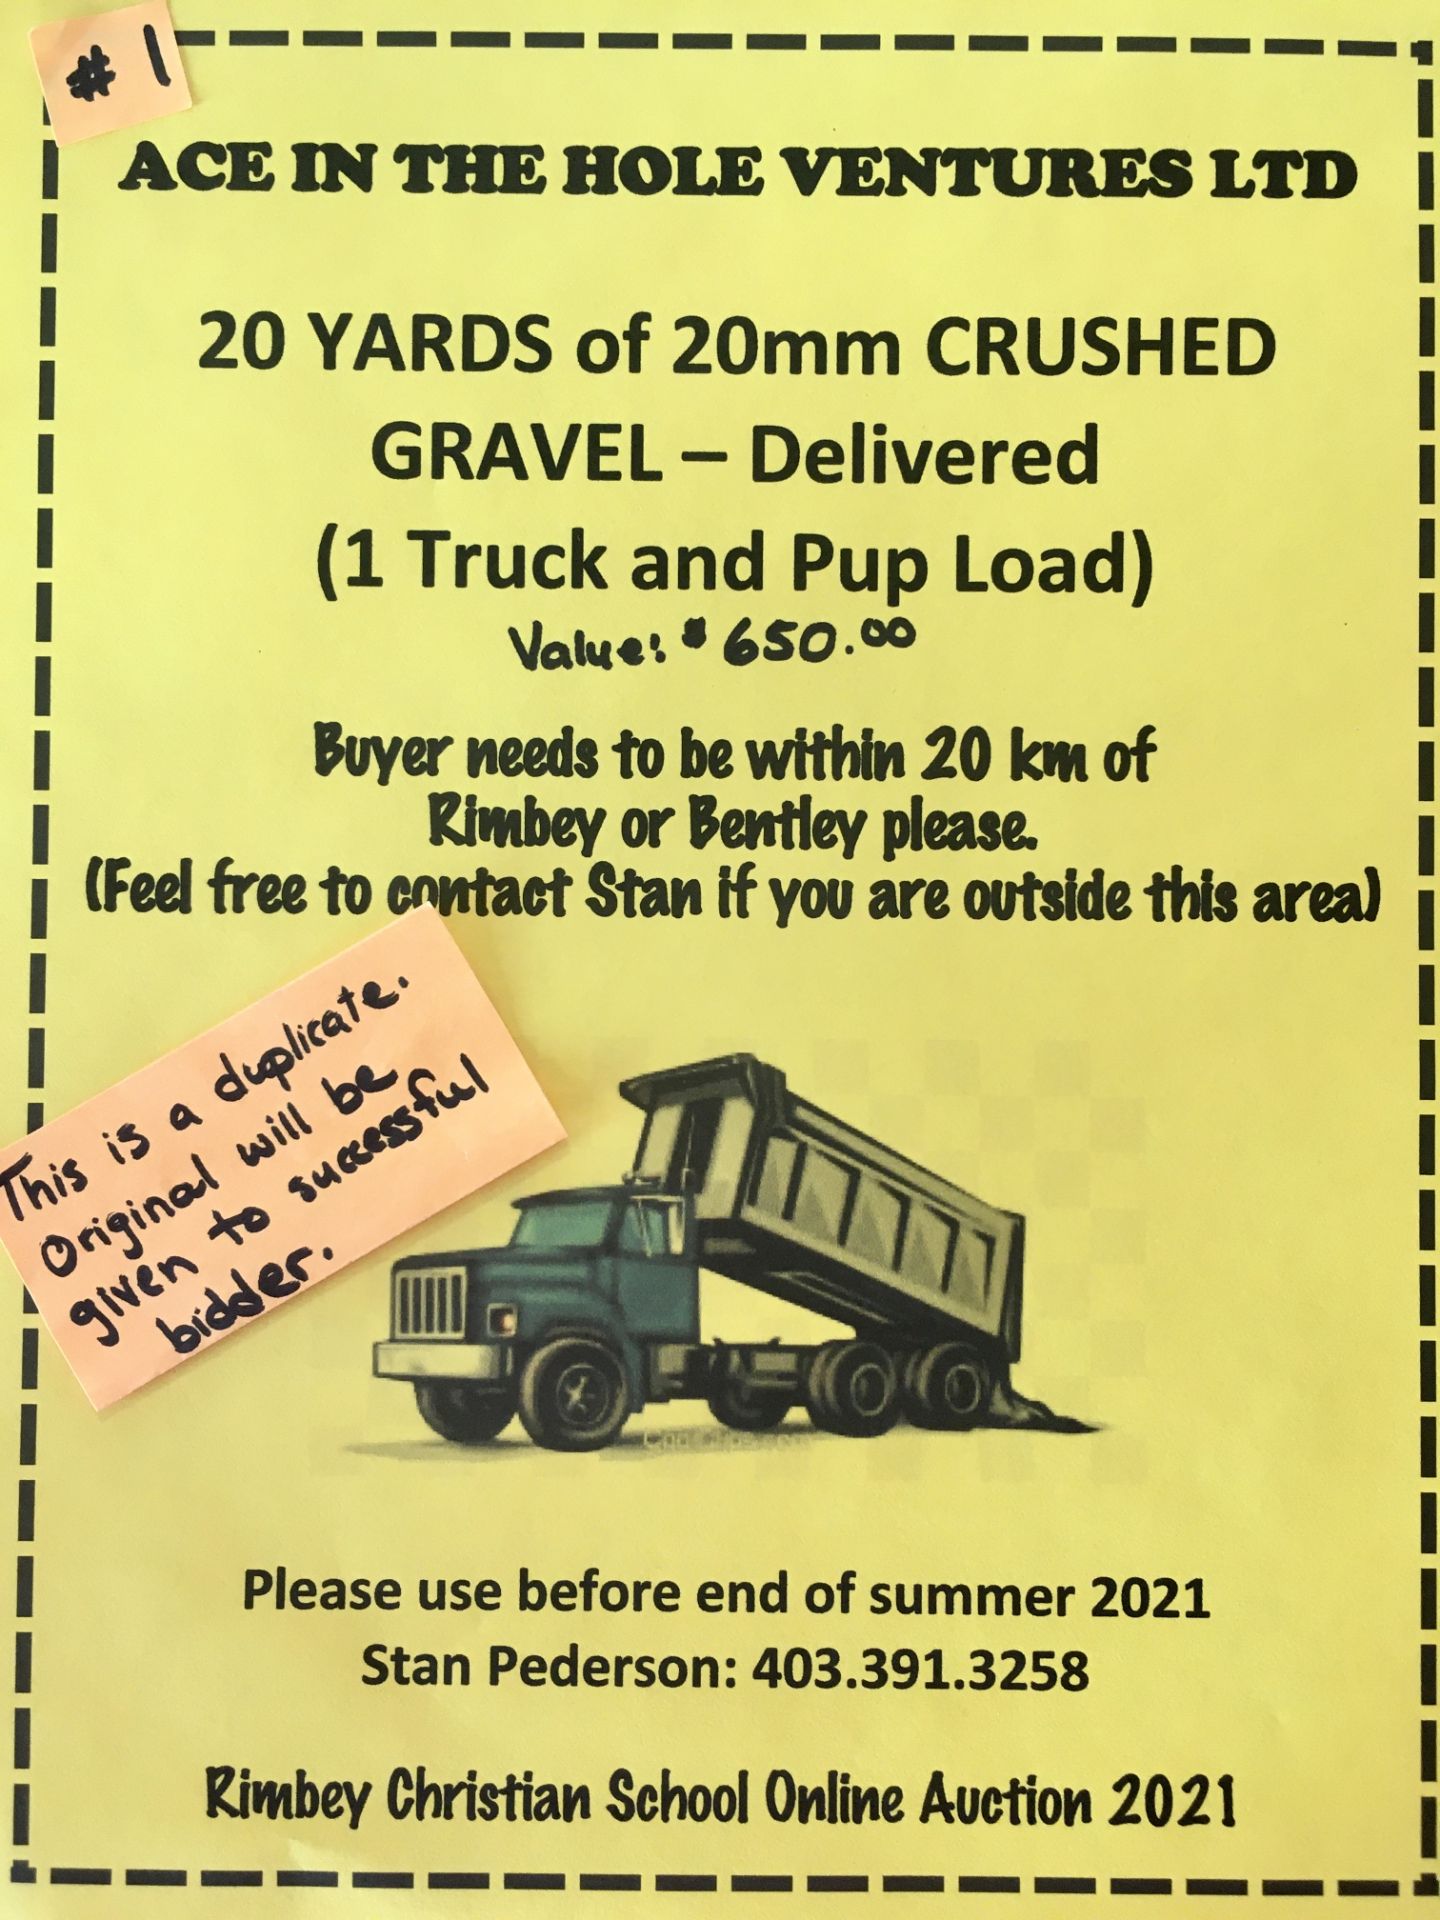 20 YARDS of 20mm CRUSHED GRAVEL - DELIVERED (1 Truck & Pup) Buyer needs to be within 20 km of Rimbey - Image 2 of 2